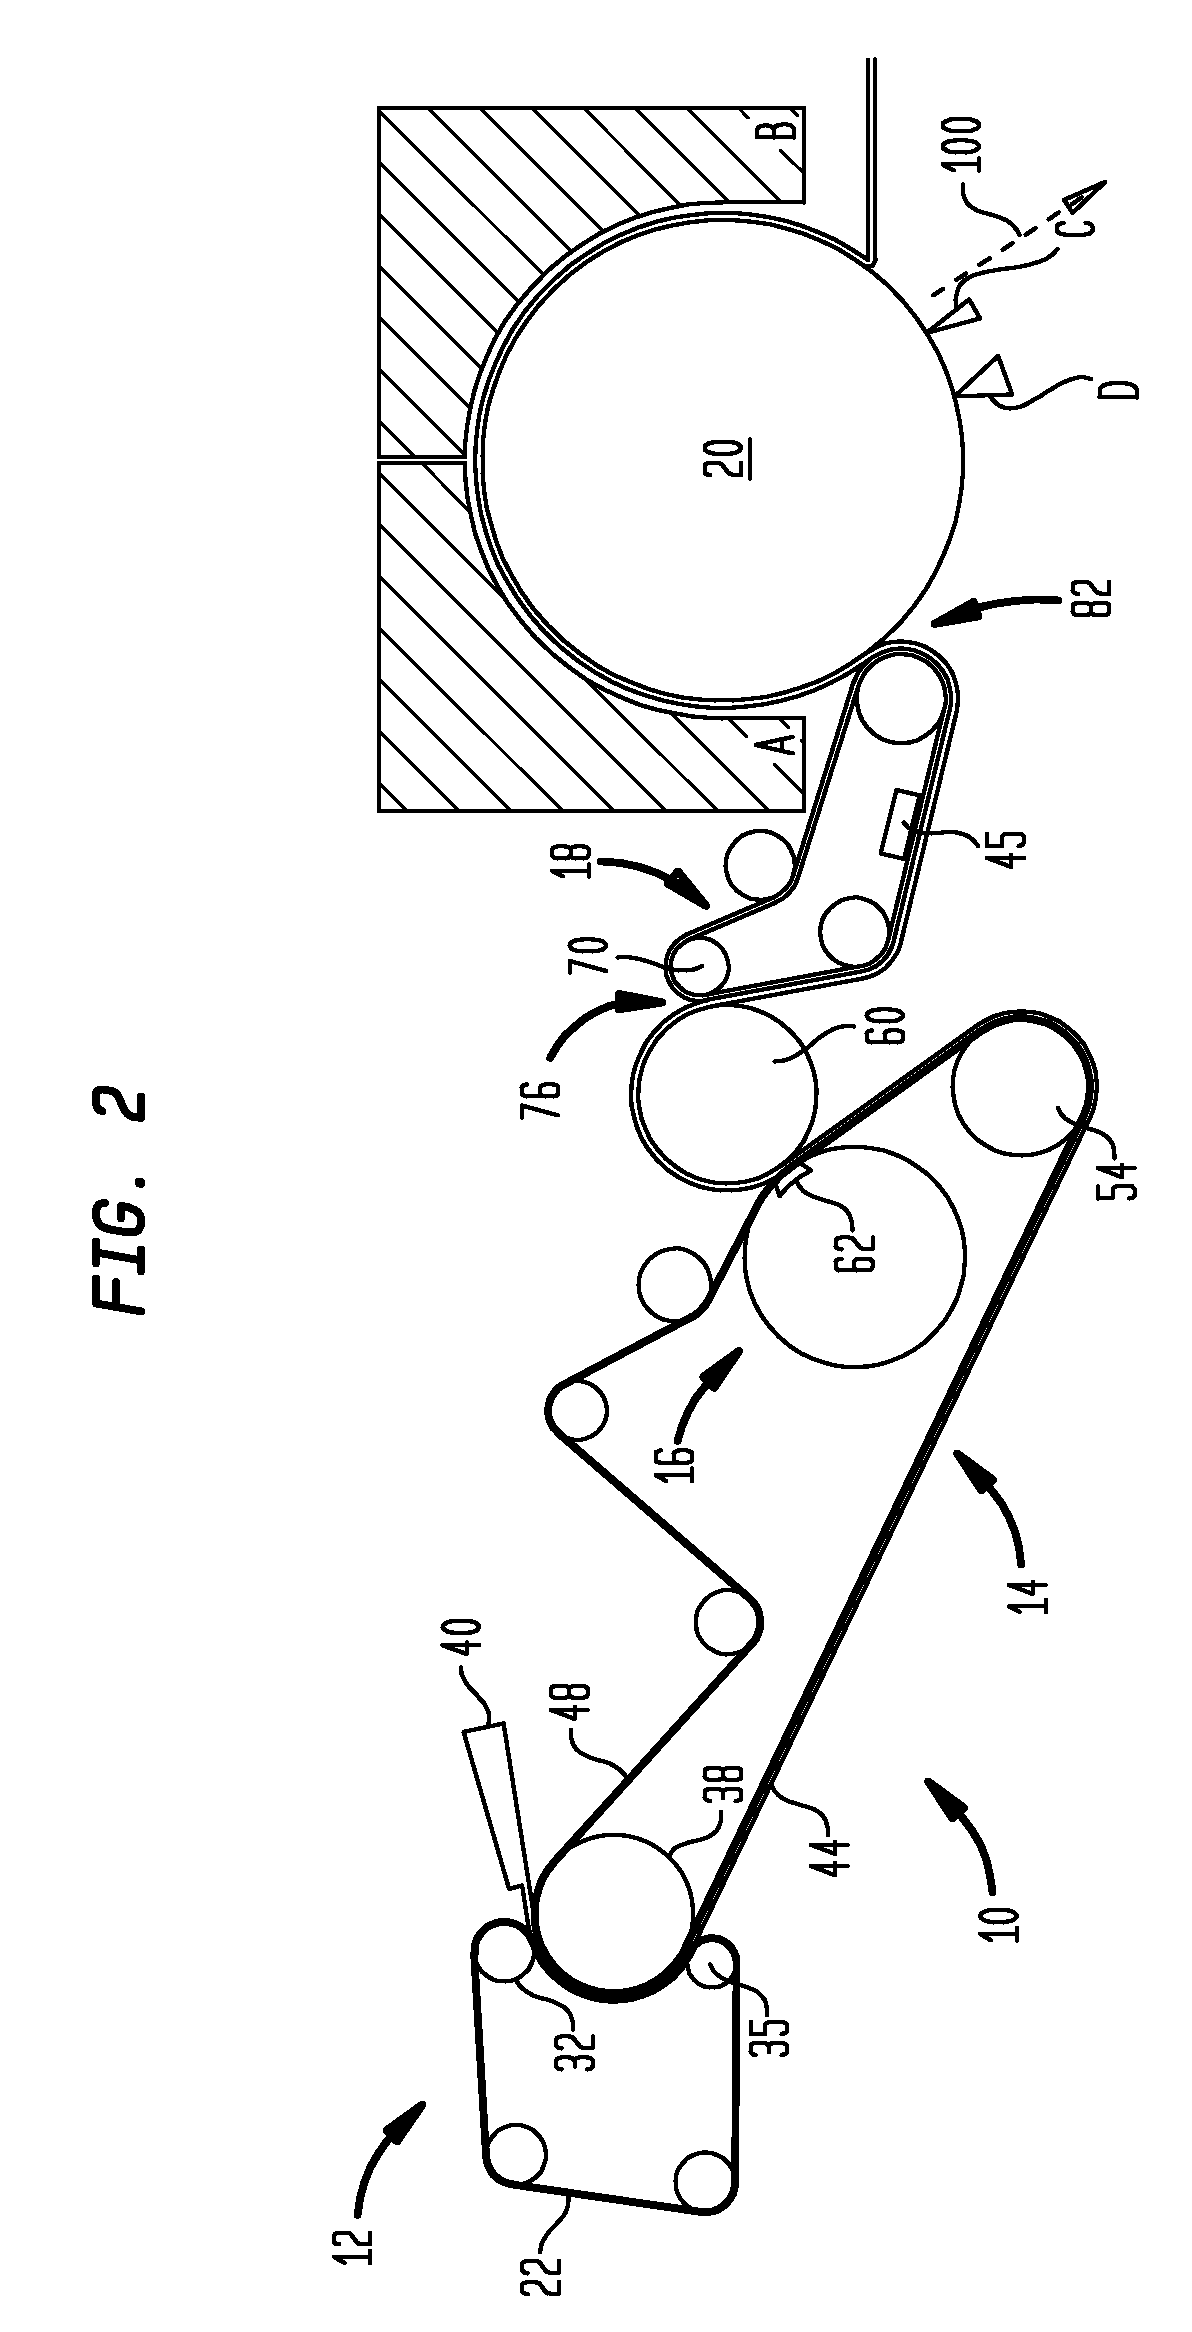 Method of controlling adhesive build-up on a yankee dryer